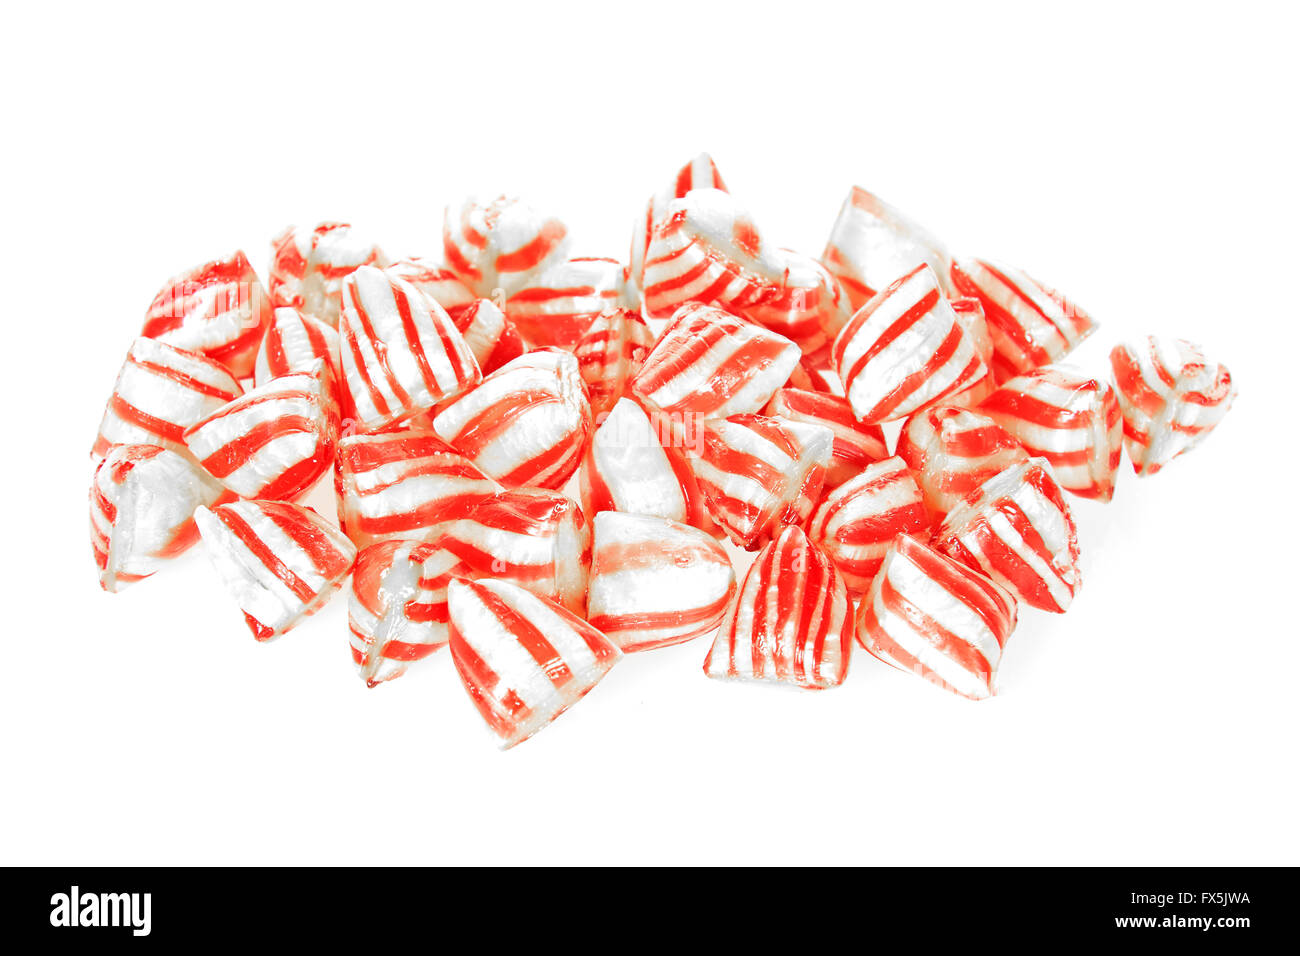 Bonbons durs rouge et blanc isolated on white Banque D'Images